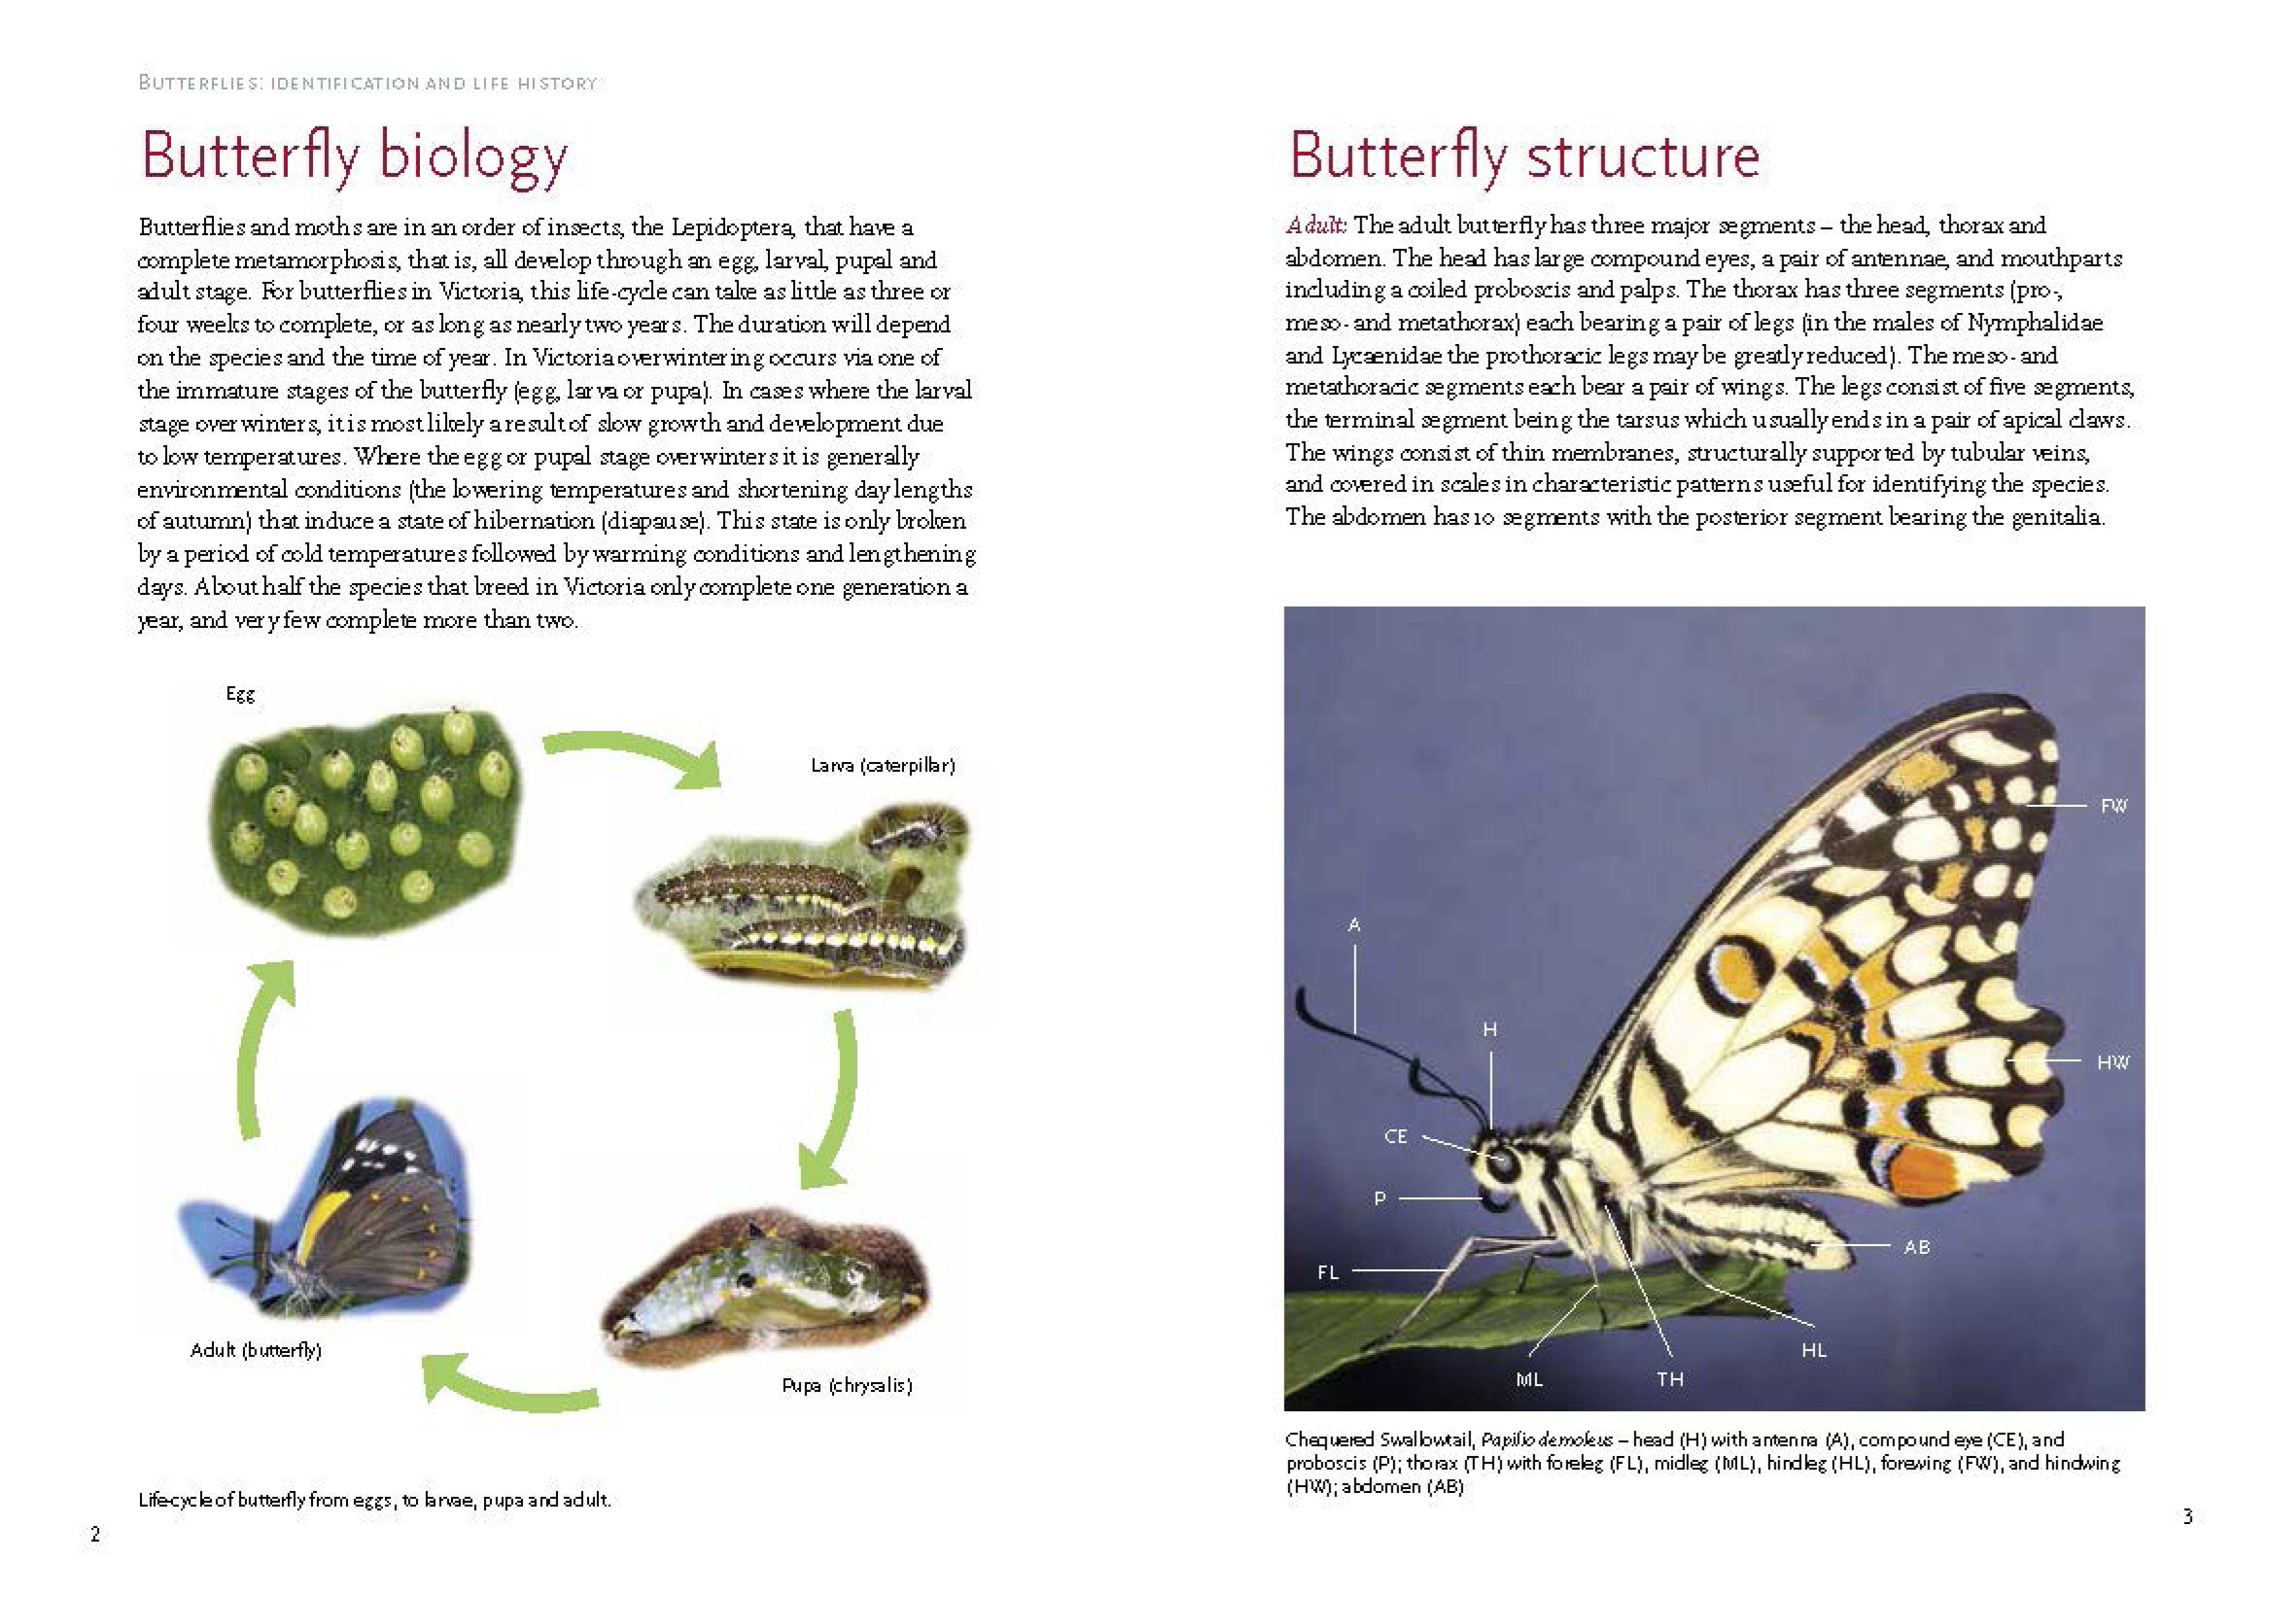 Butterflies: Identification and Life History